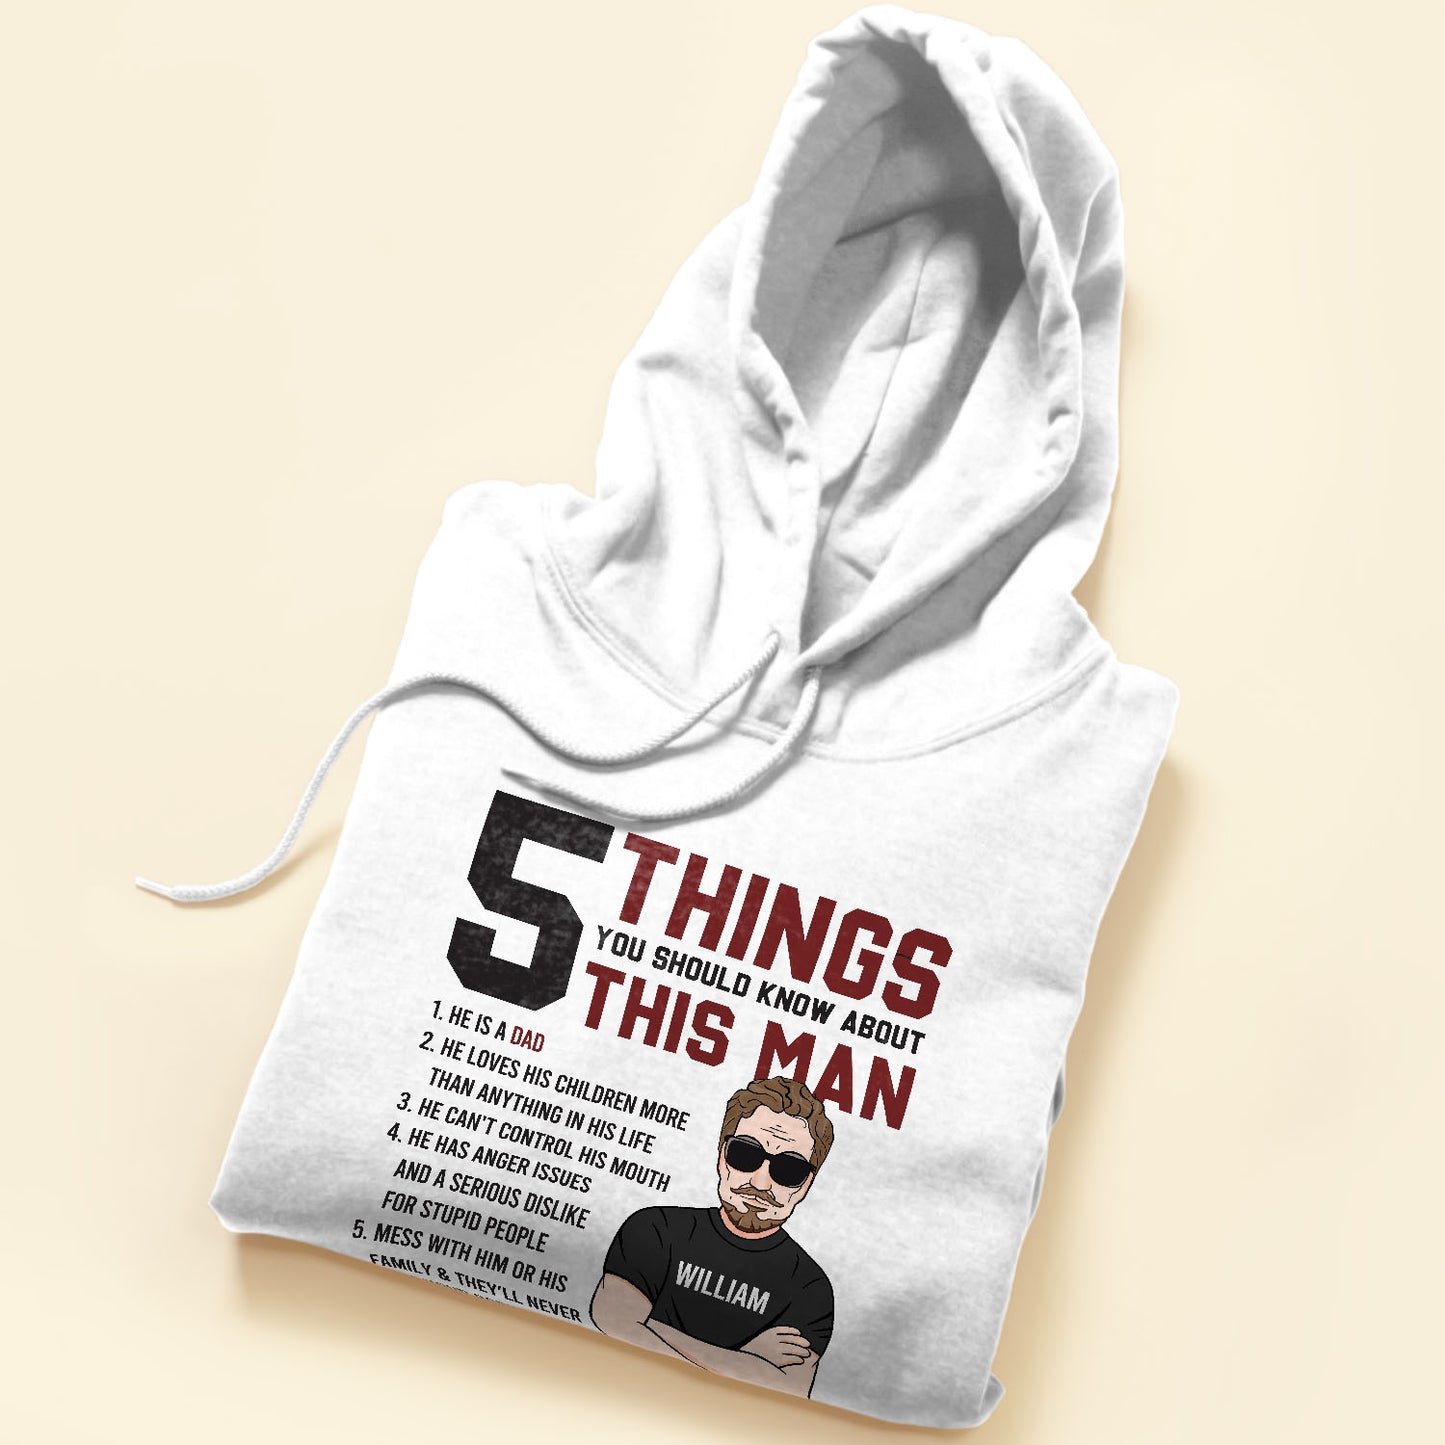 5 Things About This Dad - Personalized Shirt - Anniversary, Father's Day Gift For Dad, Father, Daddy, Papa